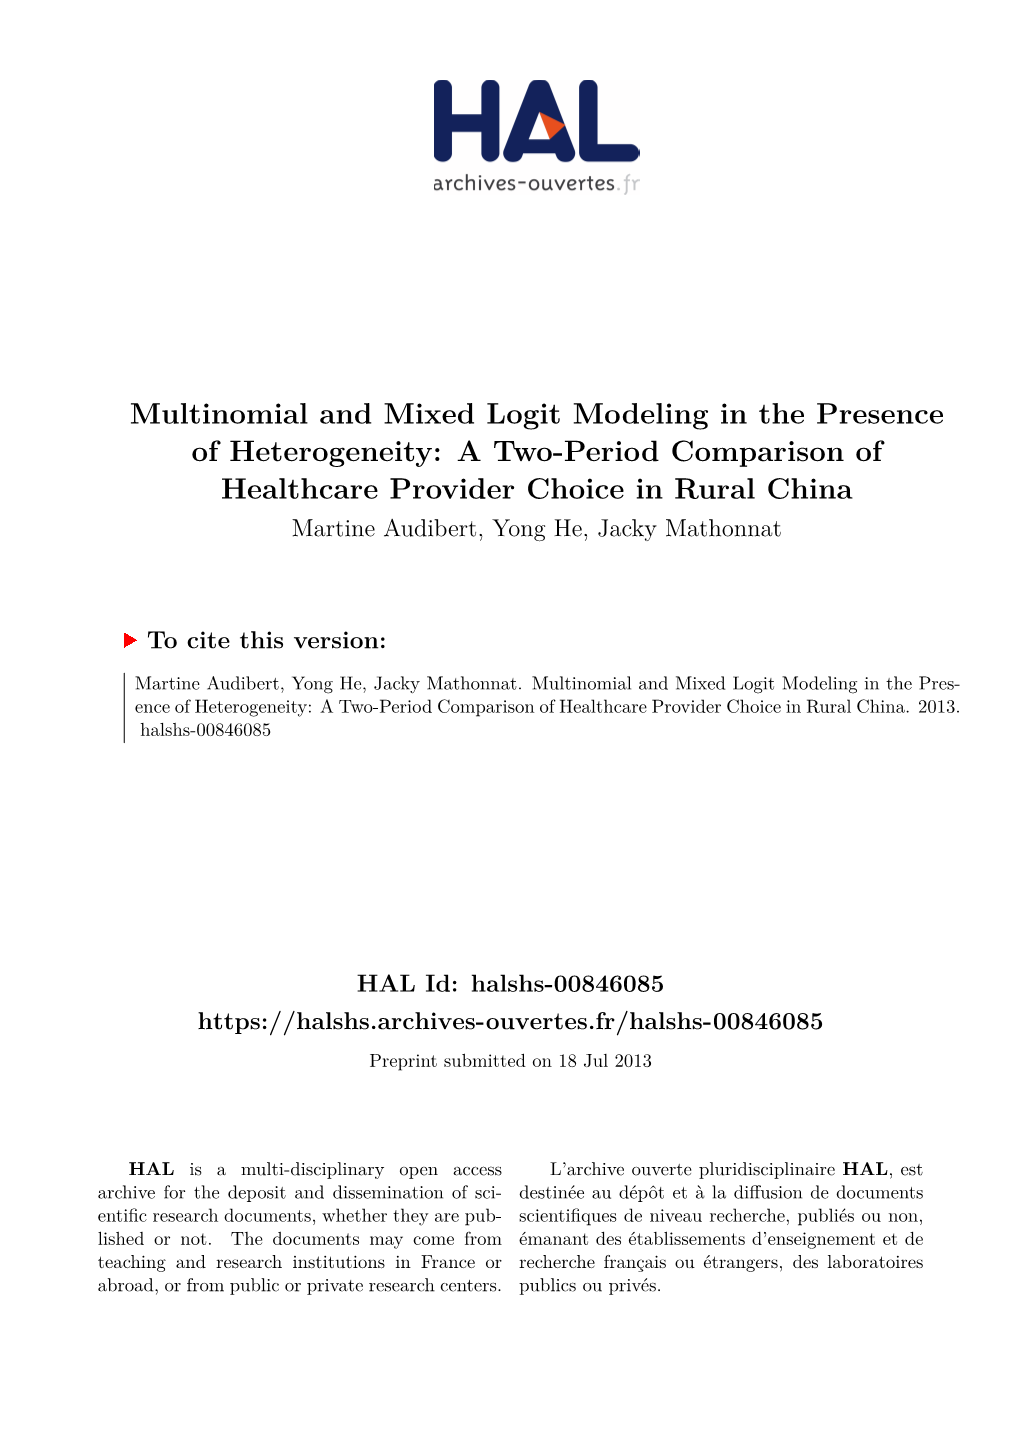 Multinomial and Mixed Logit Modeling in the Presence of Heterogeneity: A